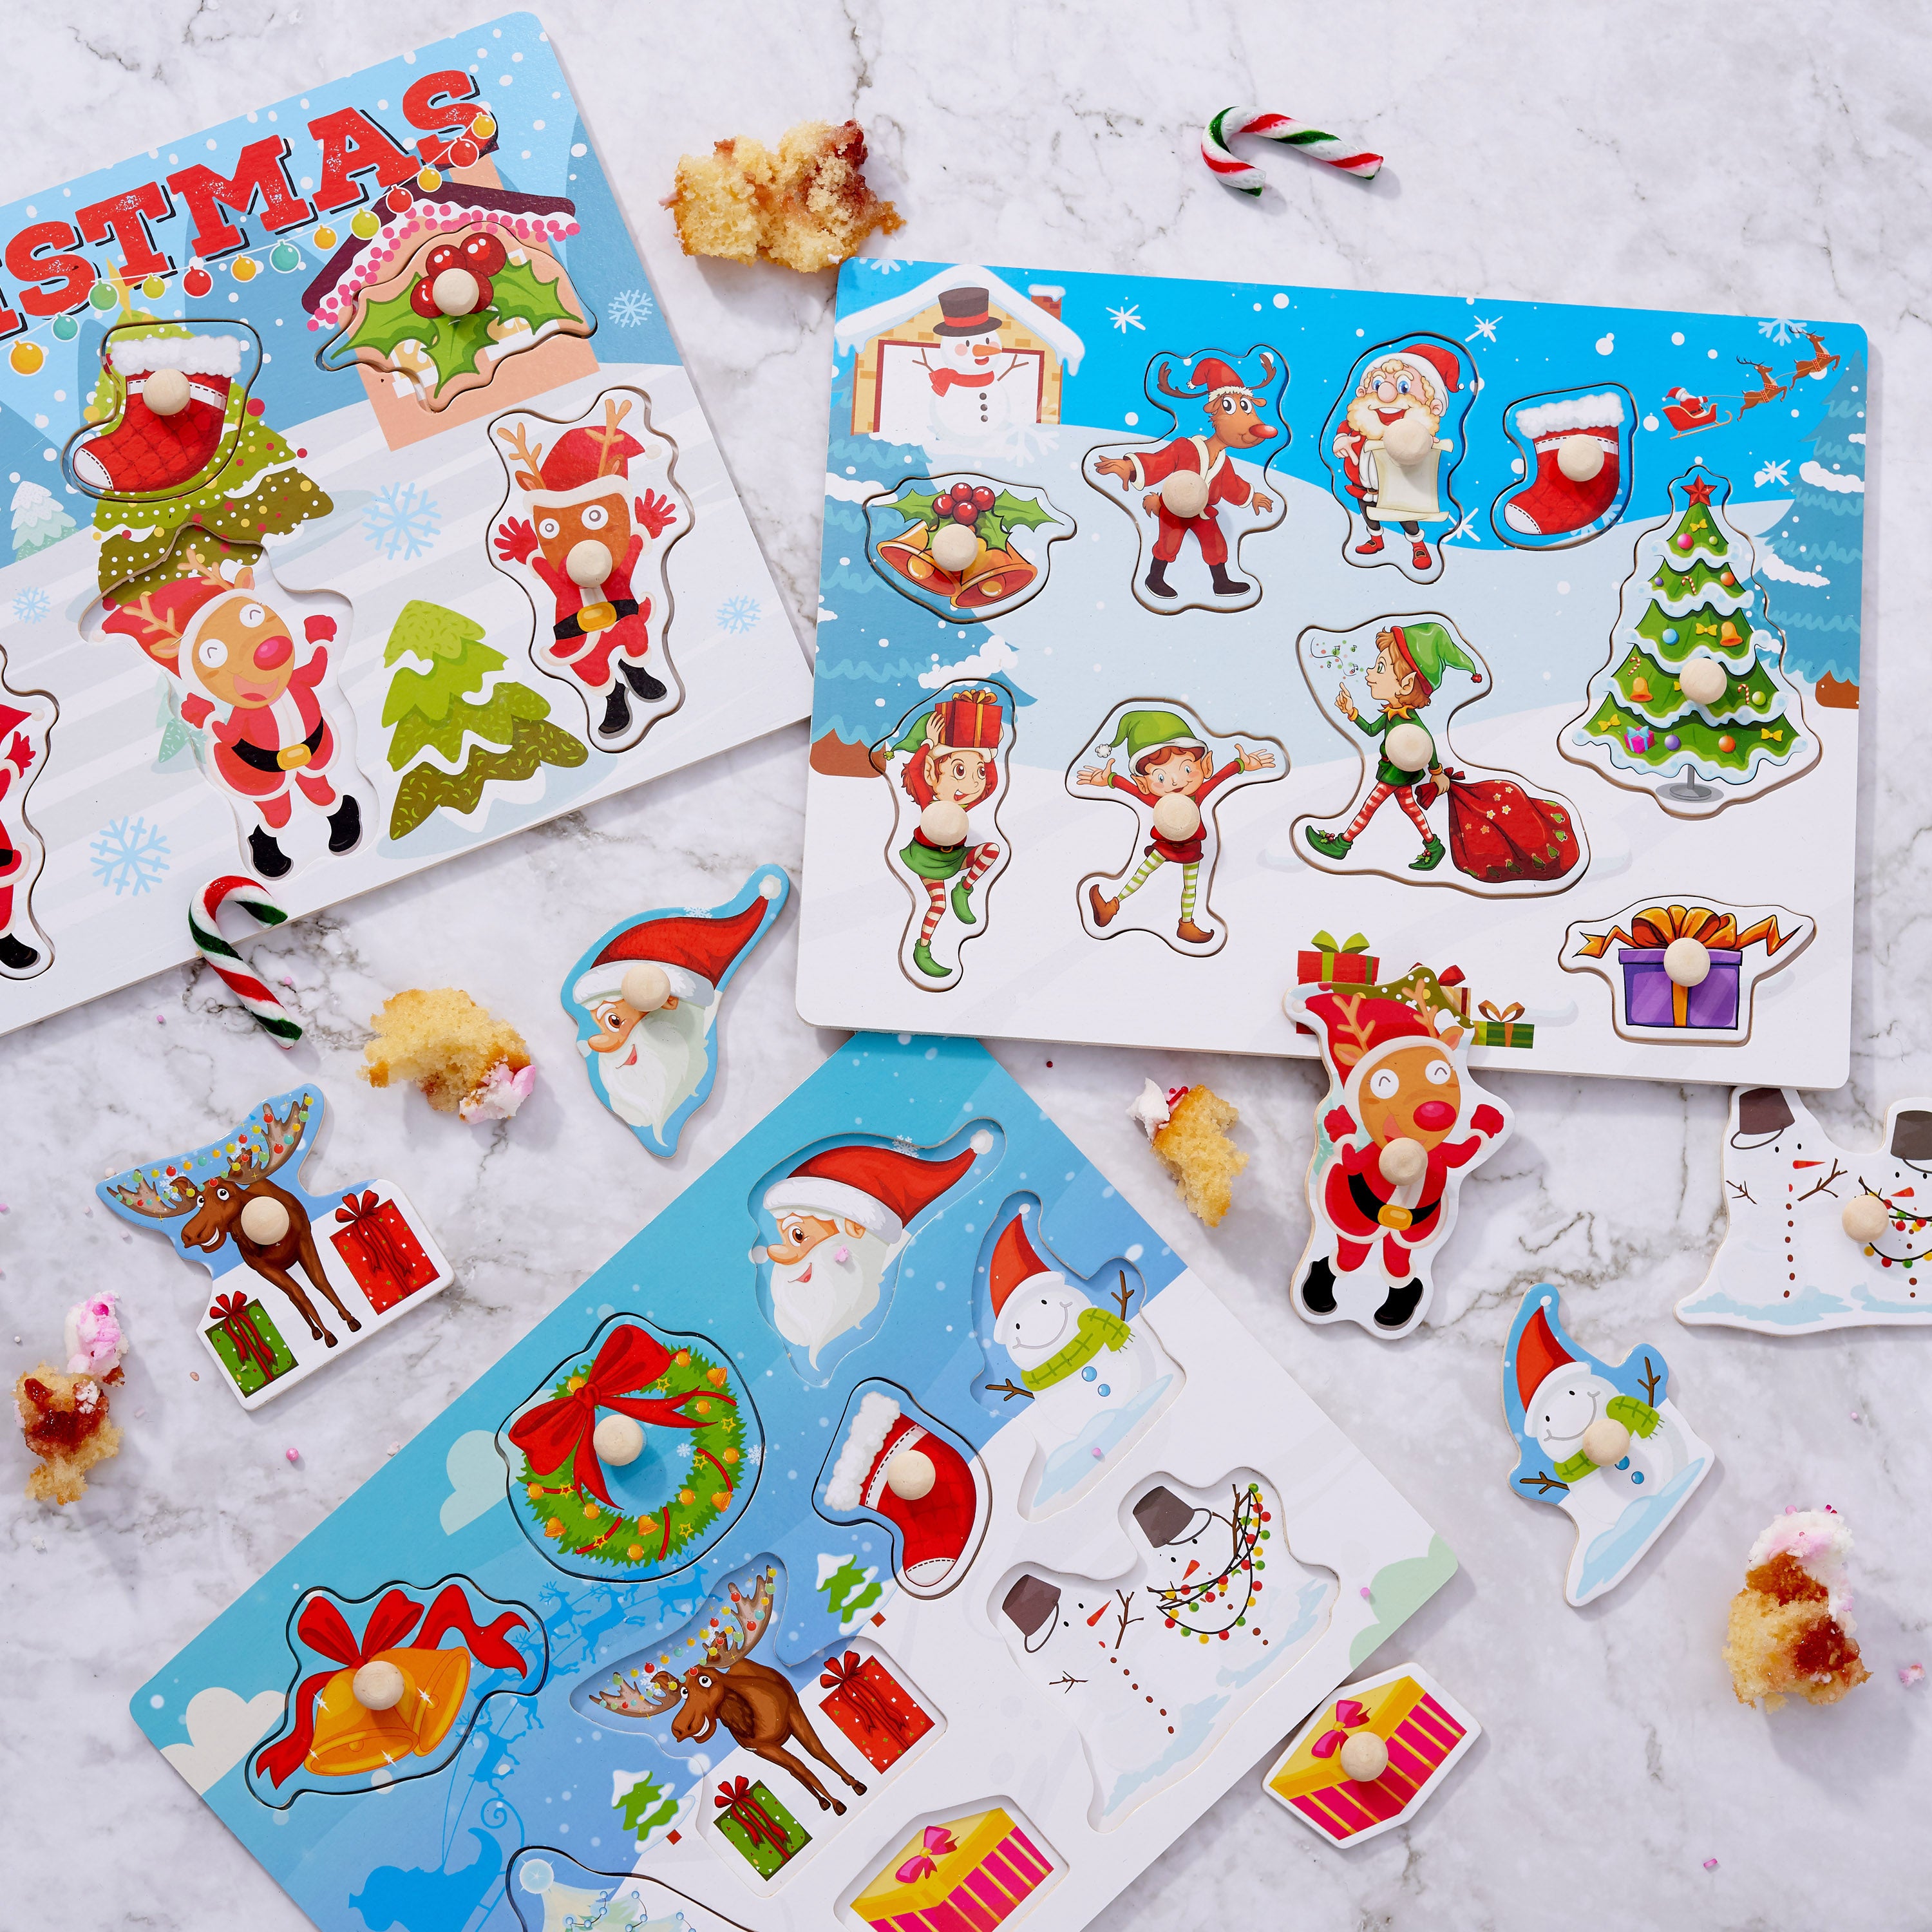 3 Christmas Wooden Peg Puzzles